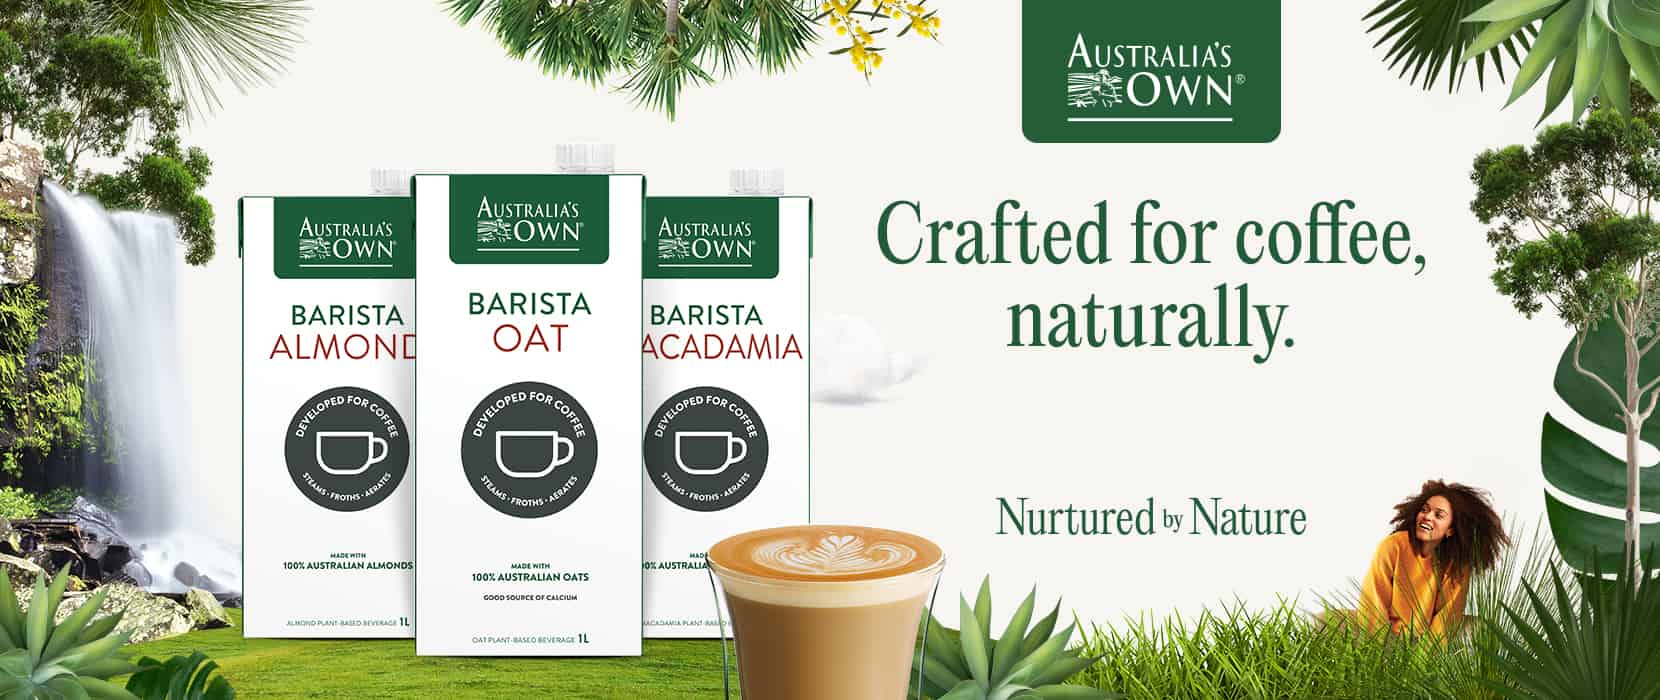 Crafted for coffee naturally